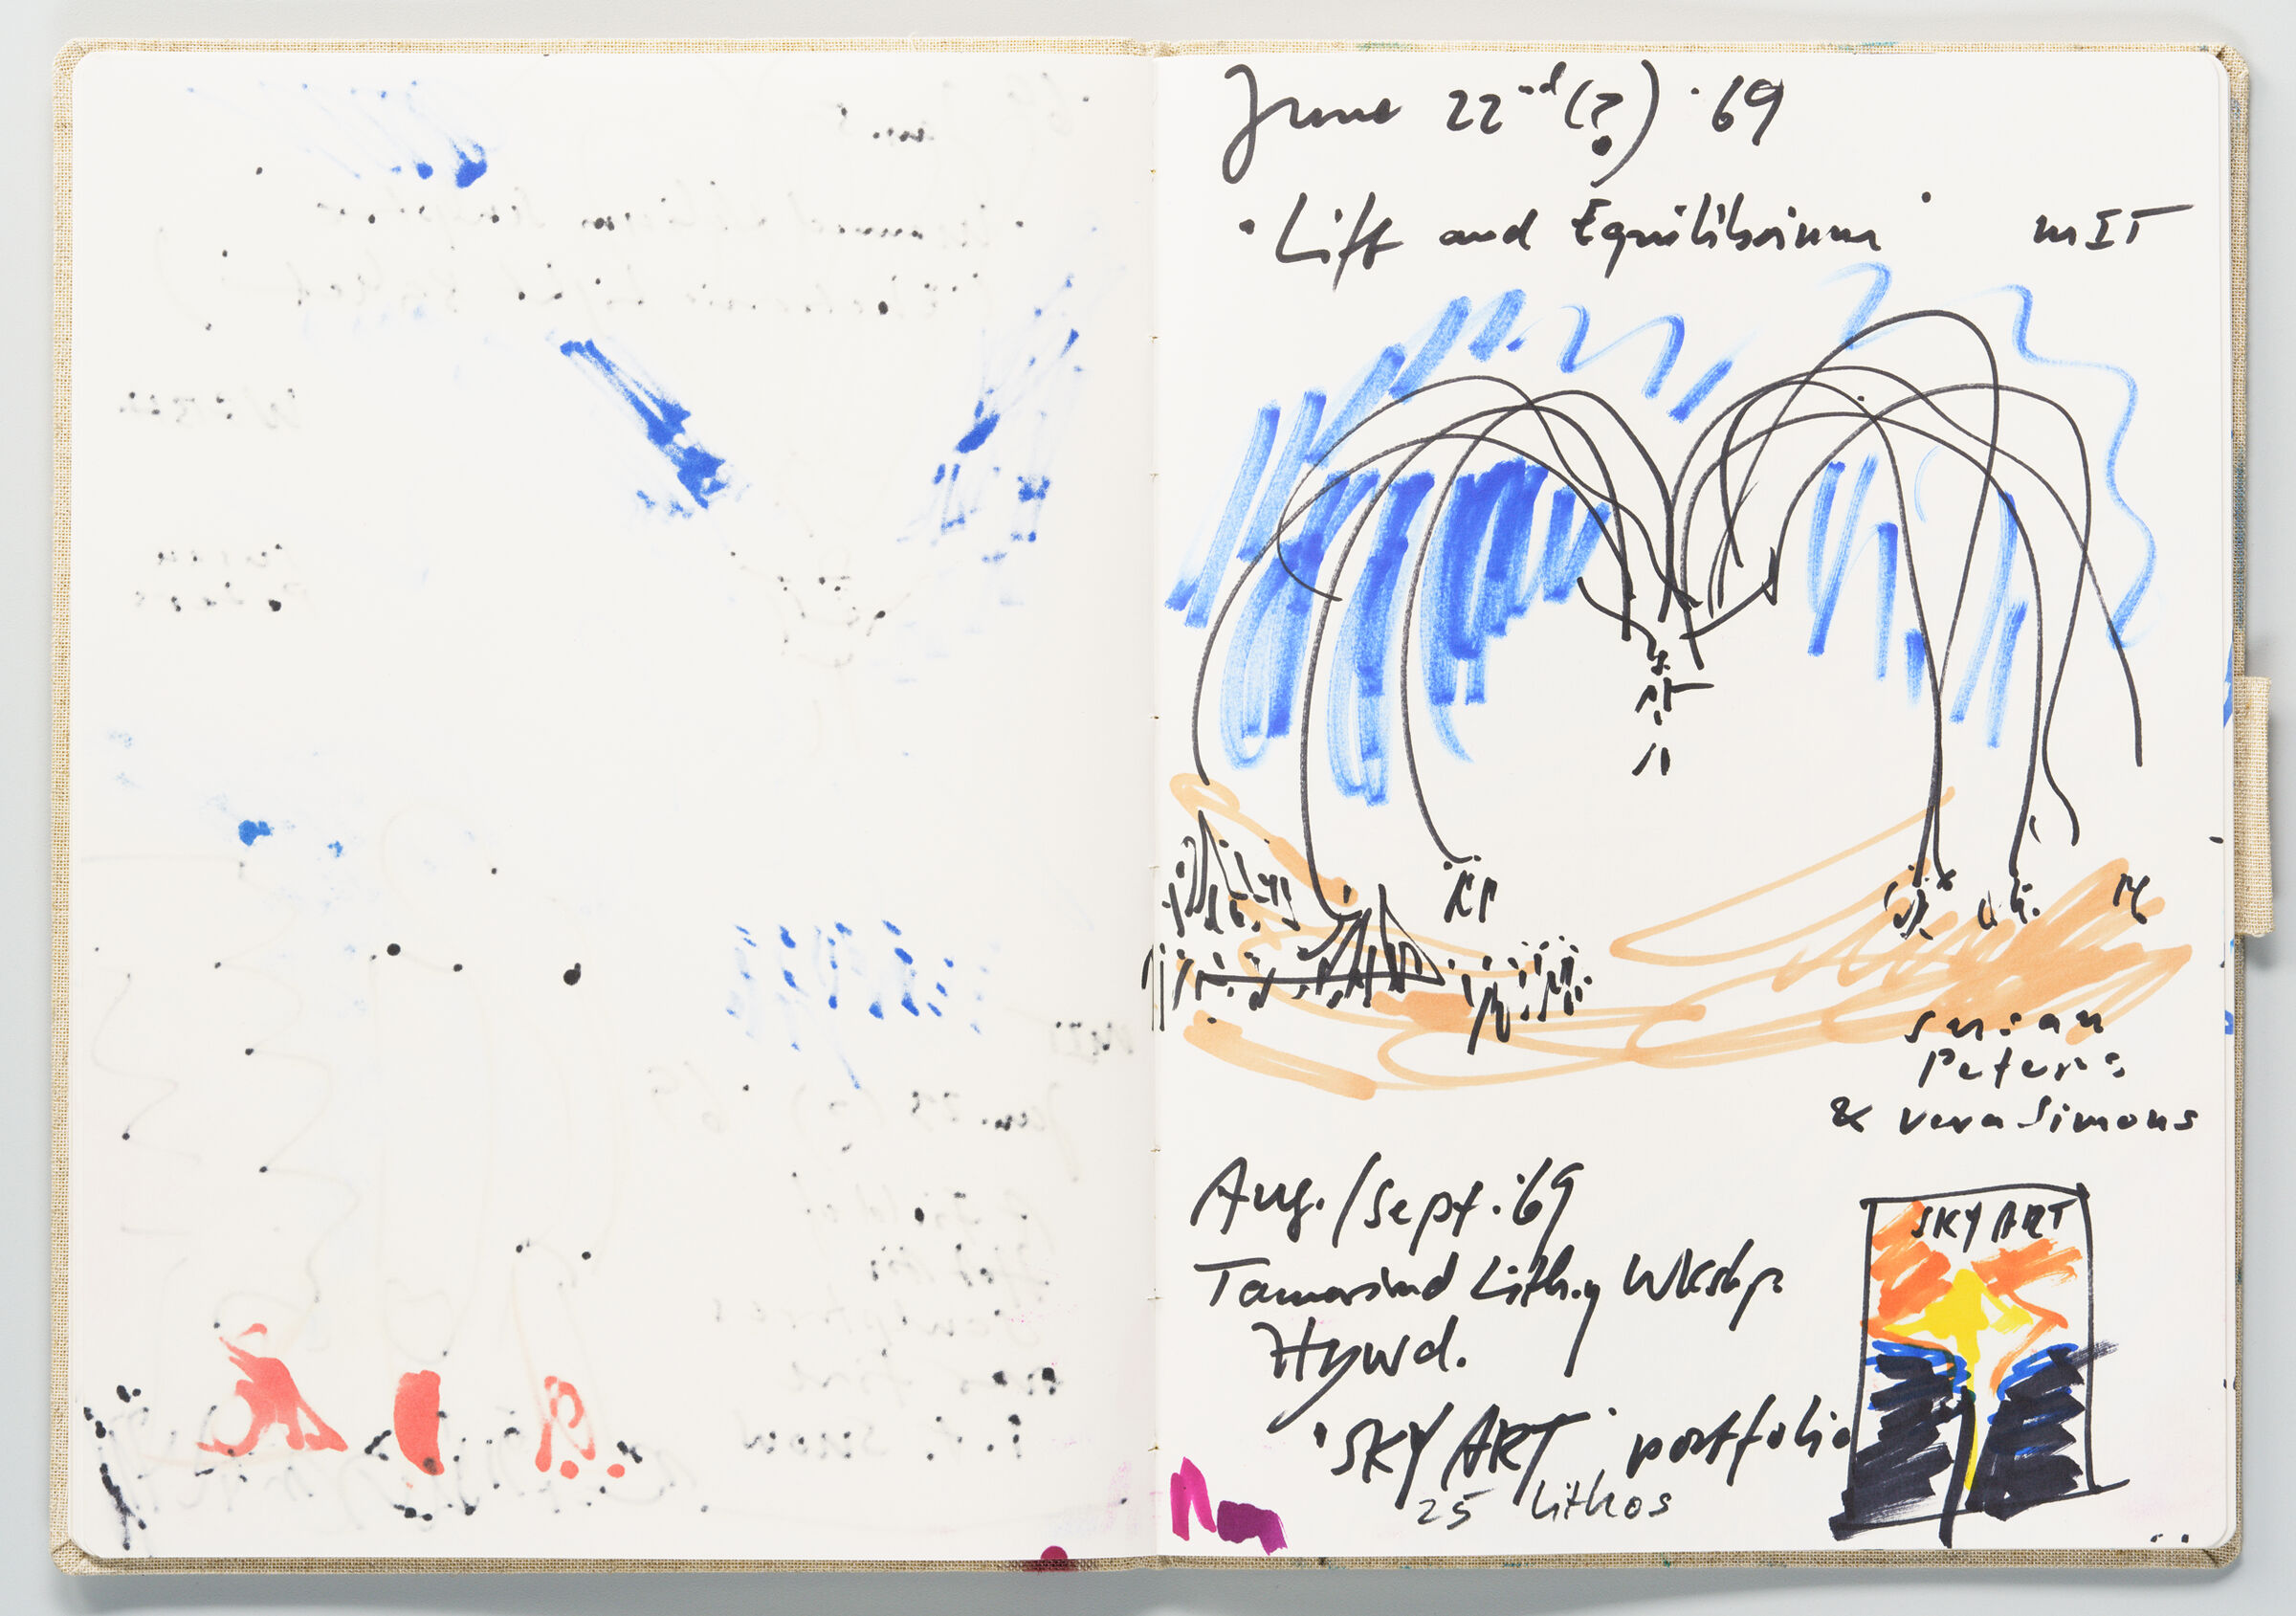 Untitled (Bleed-Through Of Previous Page With Marker Stain, Left Page); Untitled (Sketches Of Past Sky Events, Right Page)